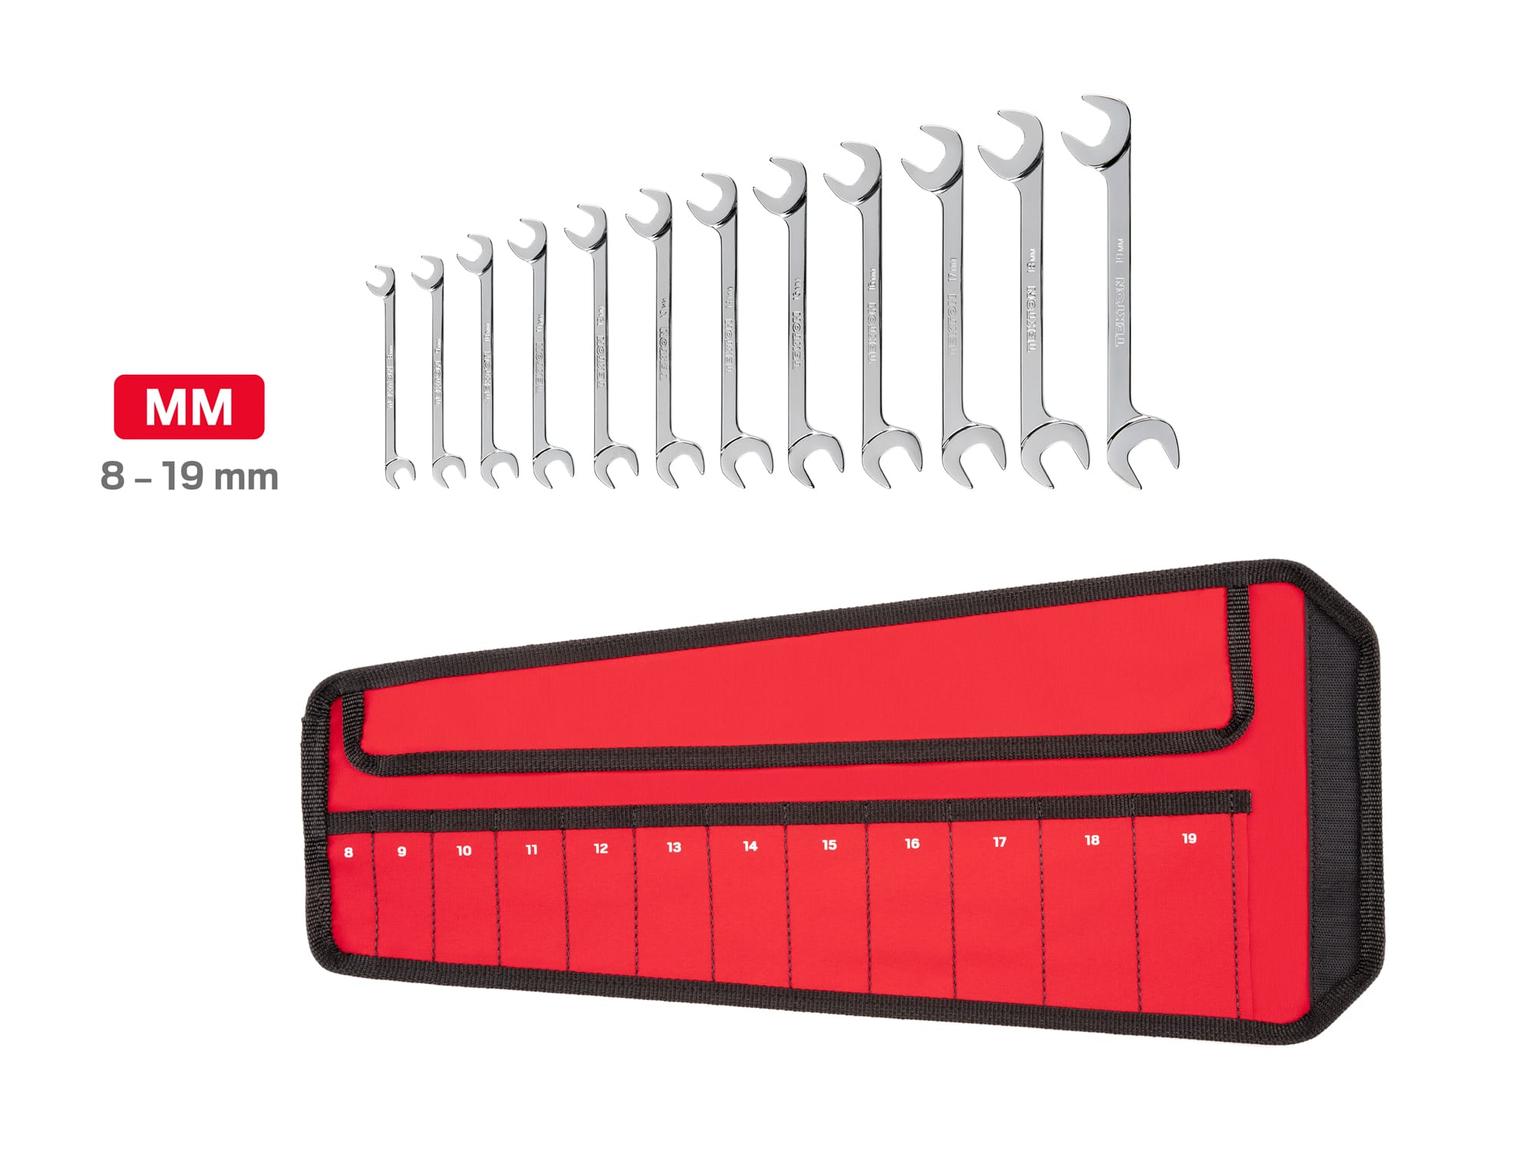 TEKTON WAE92201-T Angle Head Open End Wrench Set with Pouch, 12-Piece (8 - 19 mm)